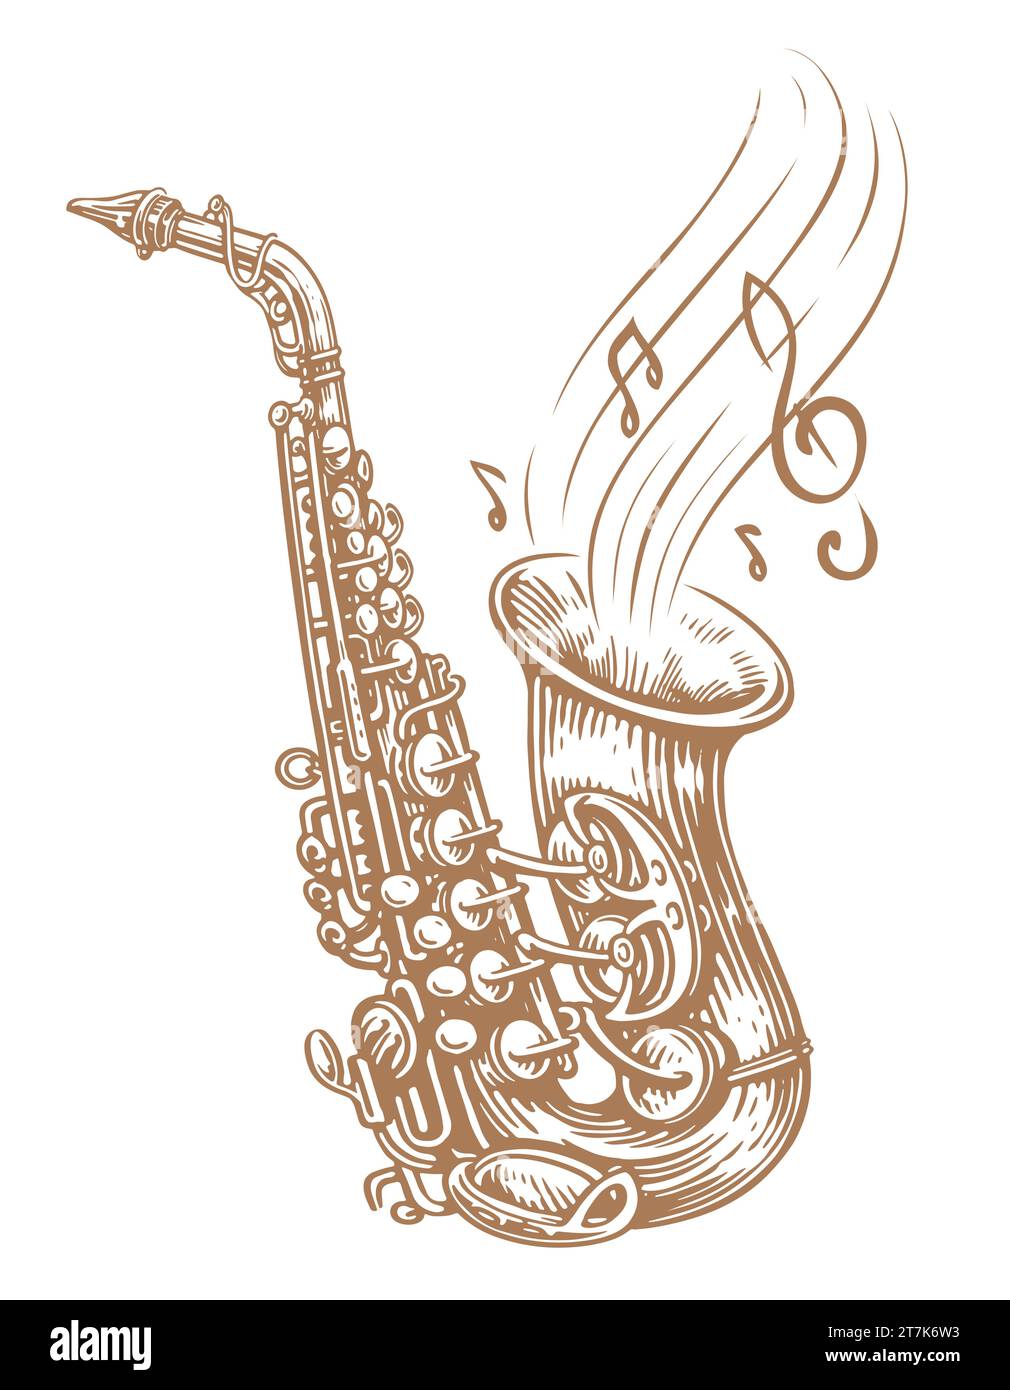 Saxophone vector illustration. Hand drawn drawing of a wind musical instrument and musical notes Stock Vector